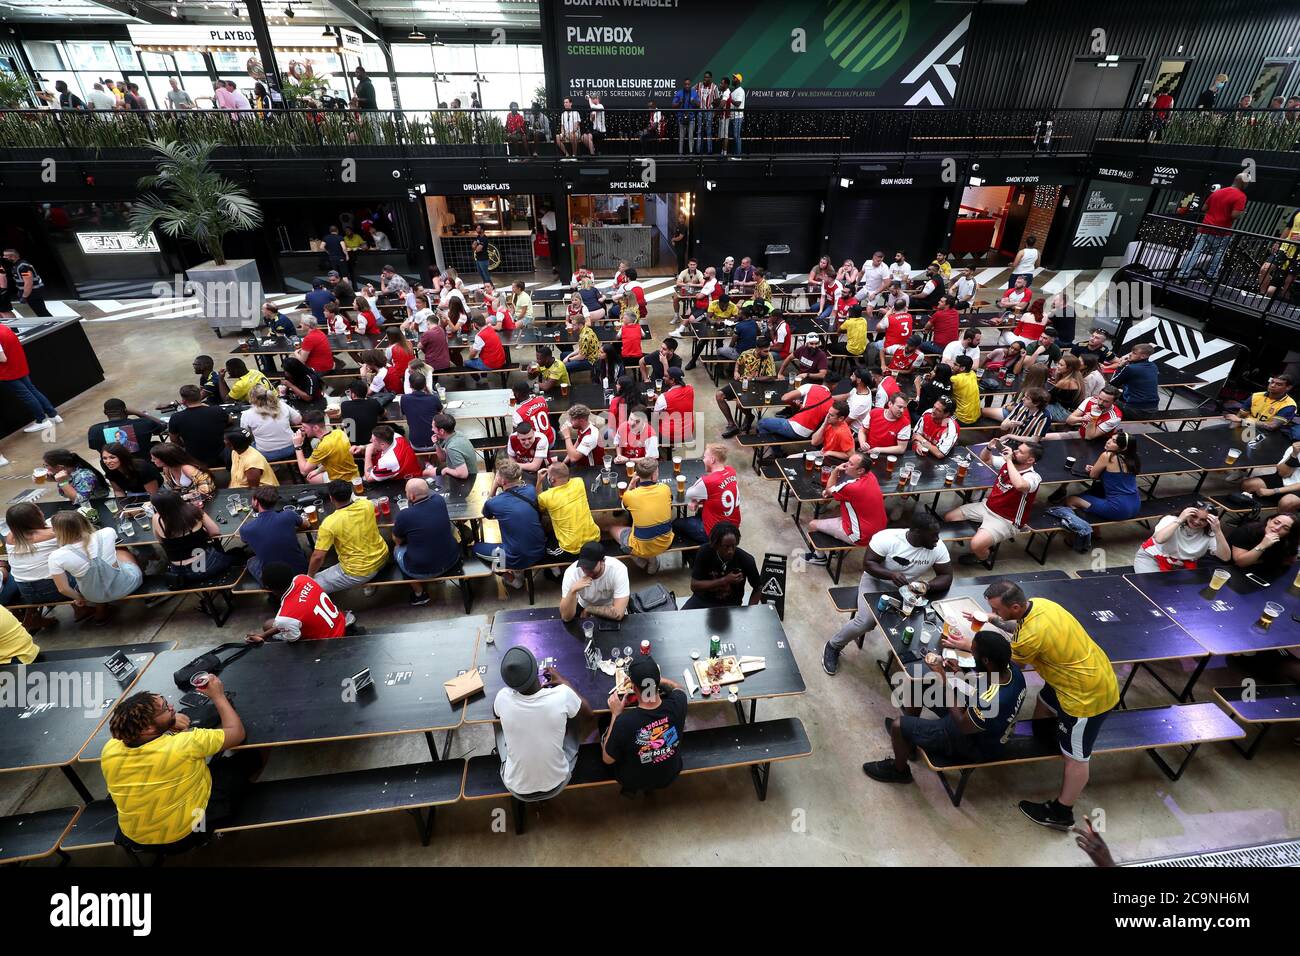 Fans at Box Park Wembley in London, as they watch the FA Cup final between Arsenal and Chelsea at Wembley Stadium Stock Photo